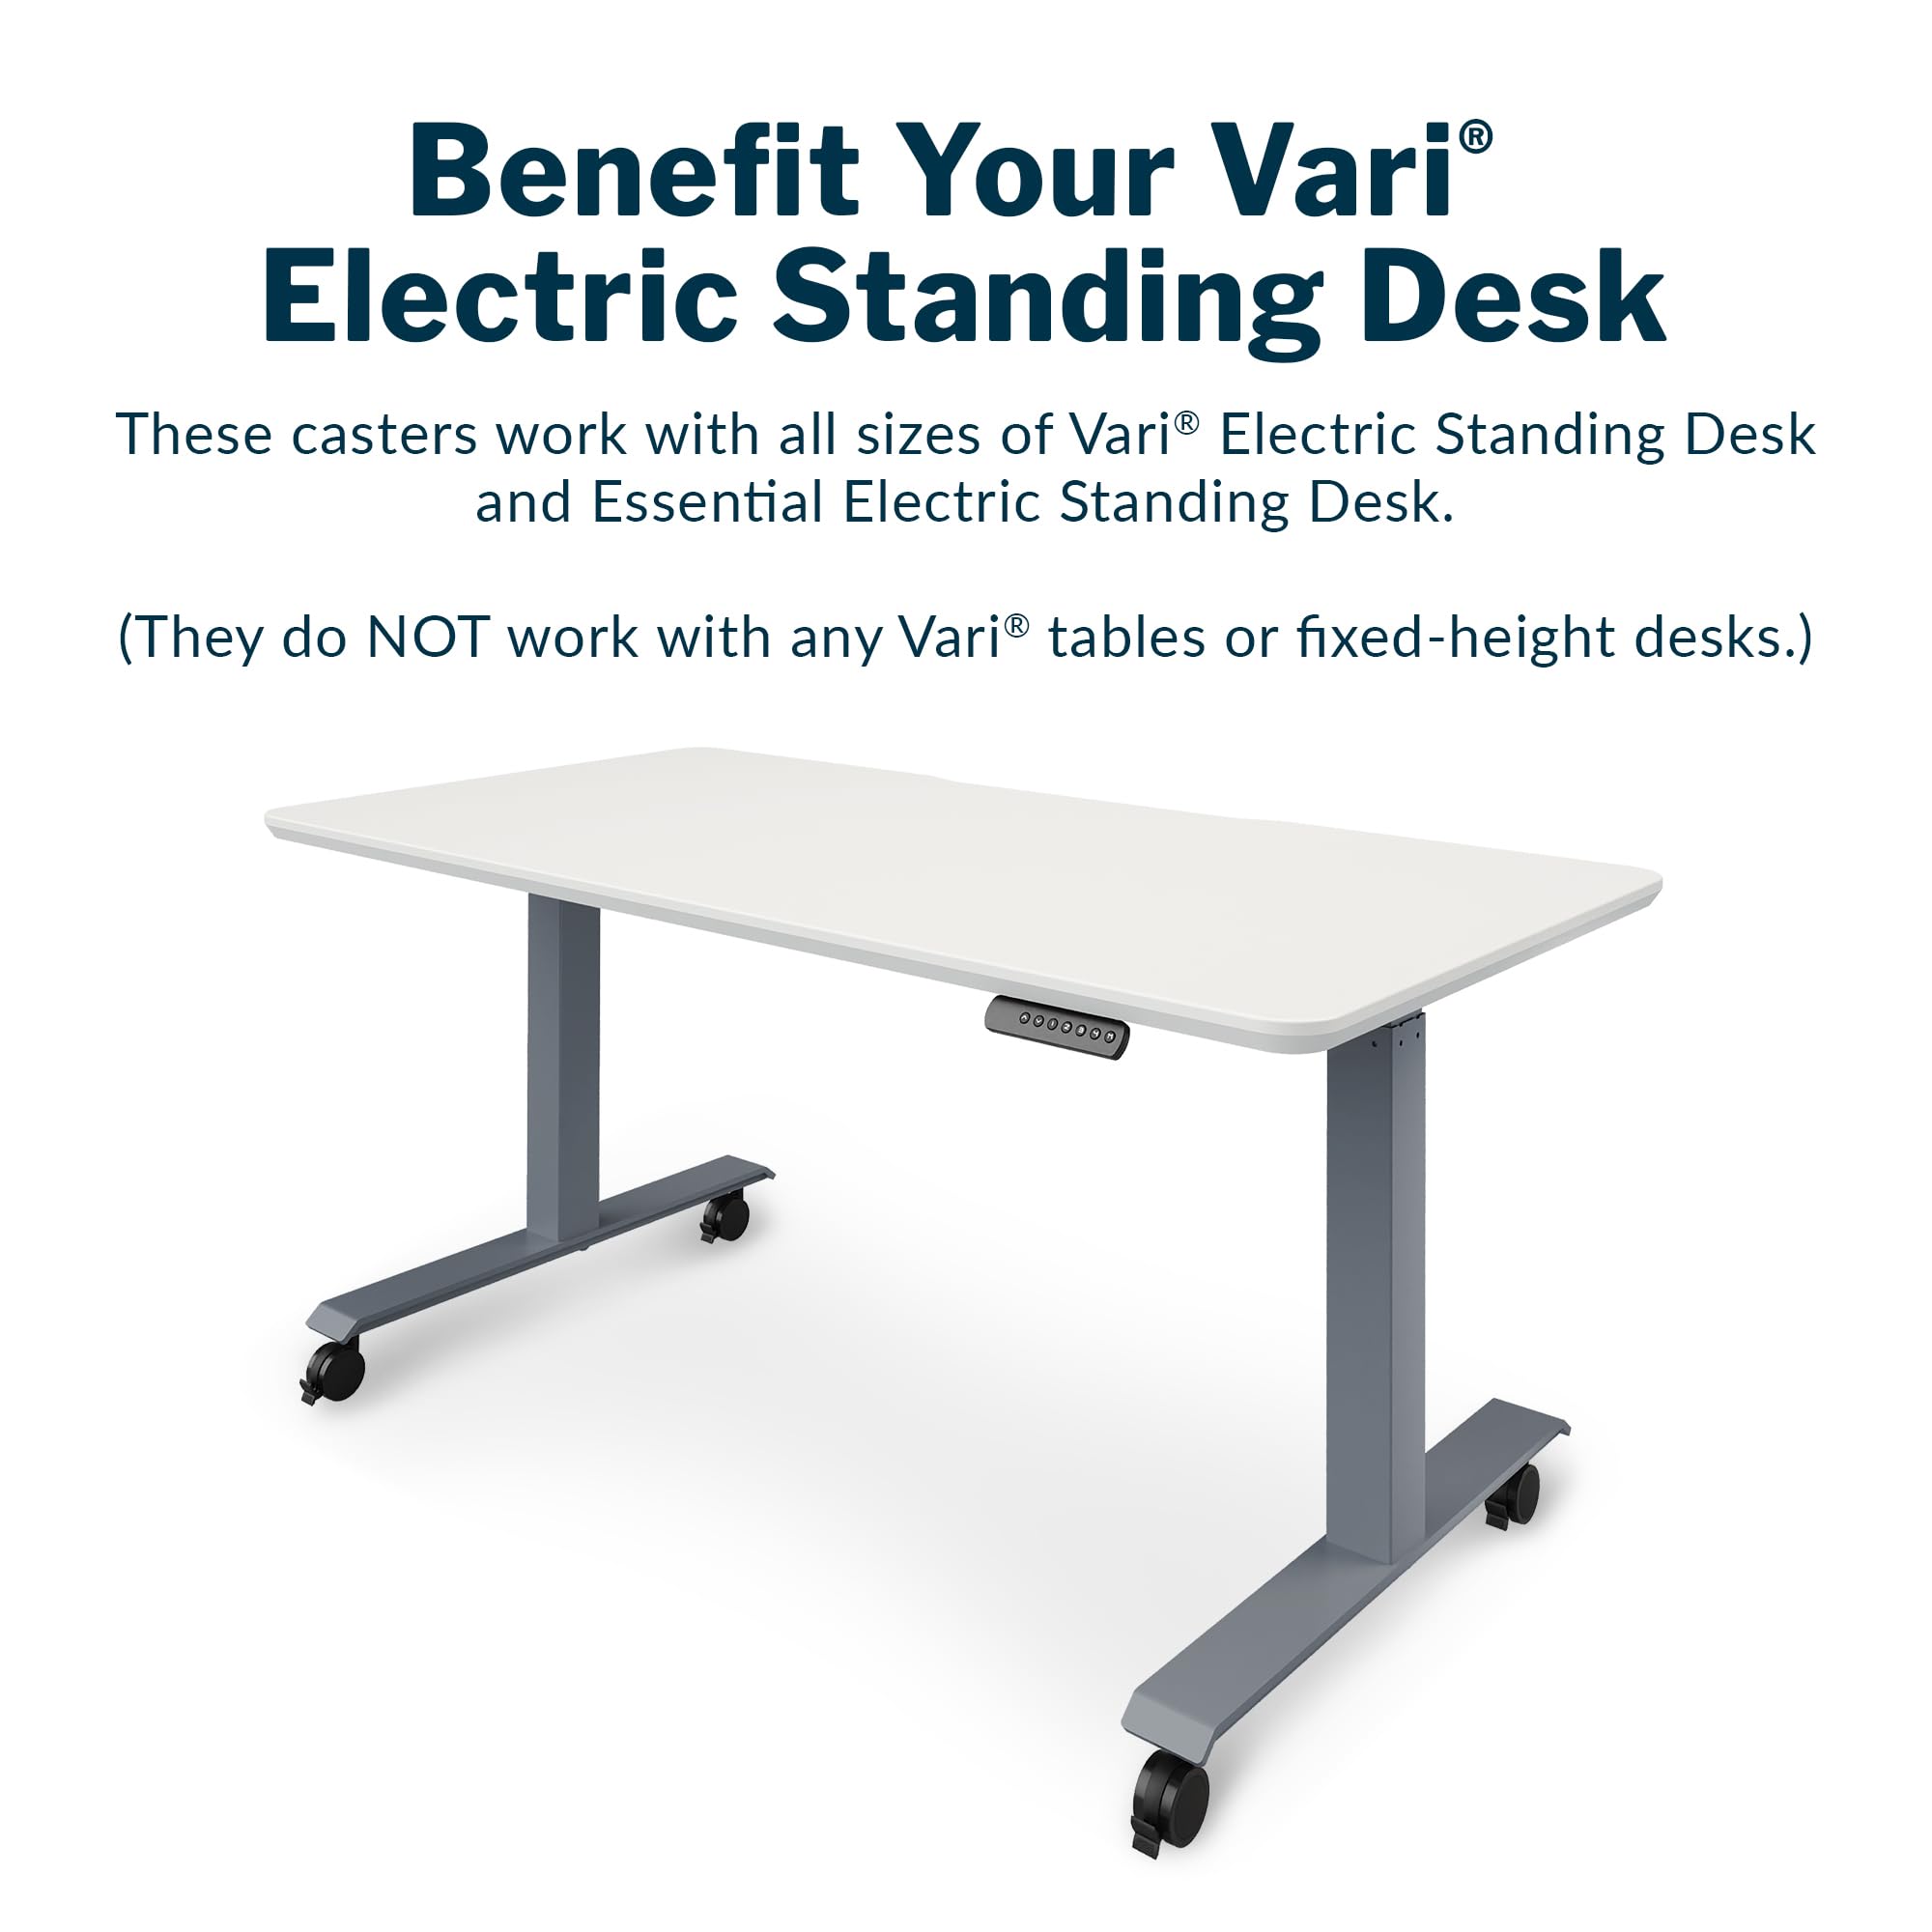 Vari Caster Wheels for Electric Standind Desk, Easy Installation and 360-Degree Movement (Set of 4)